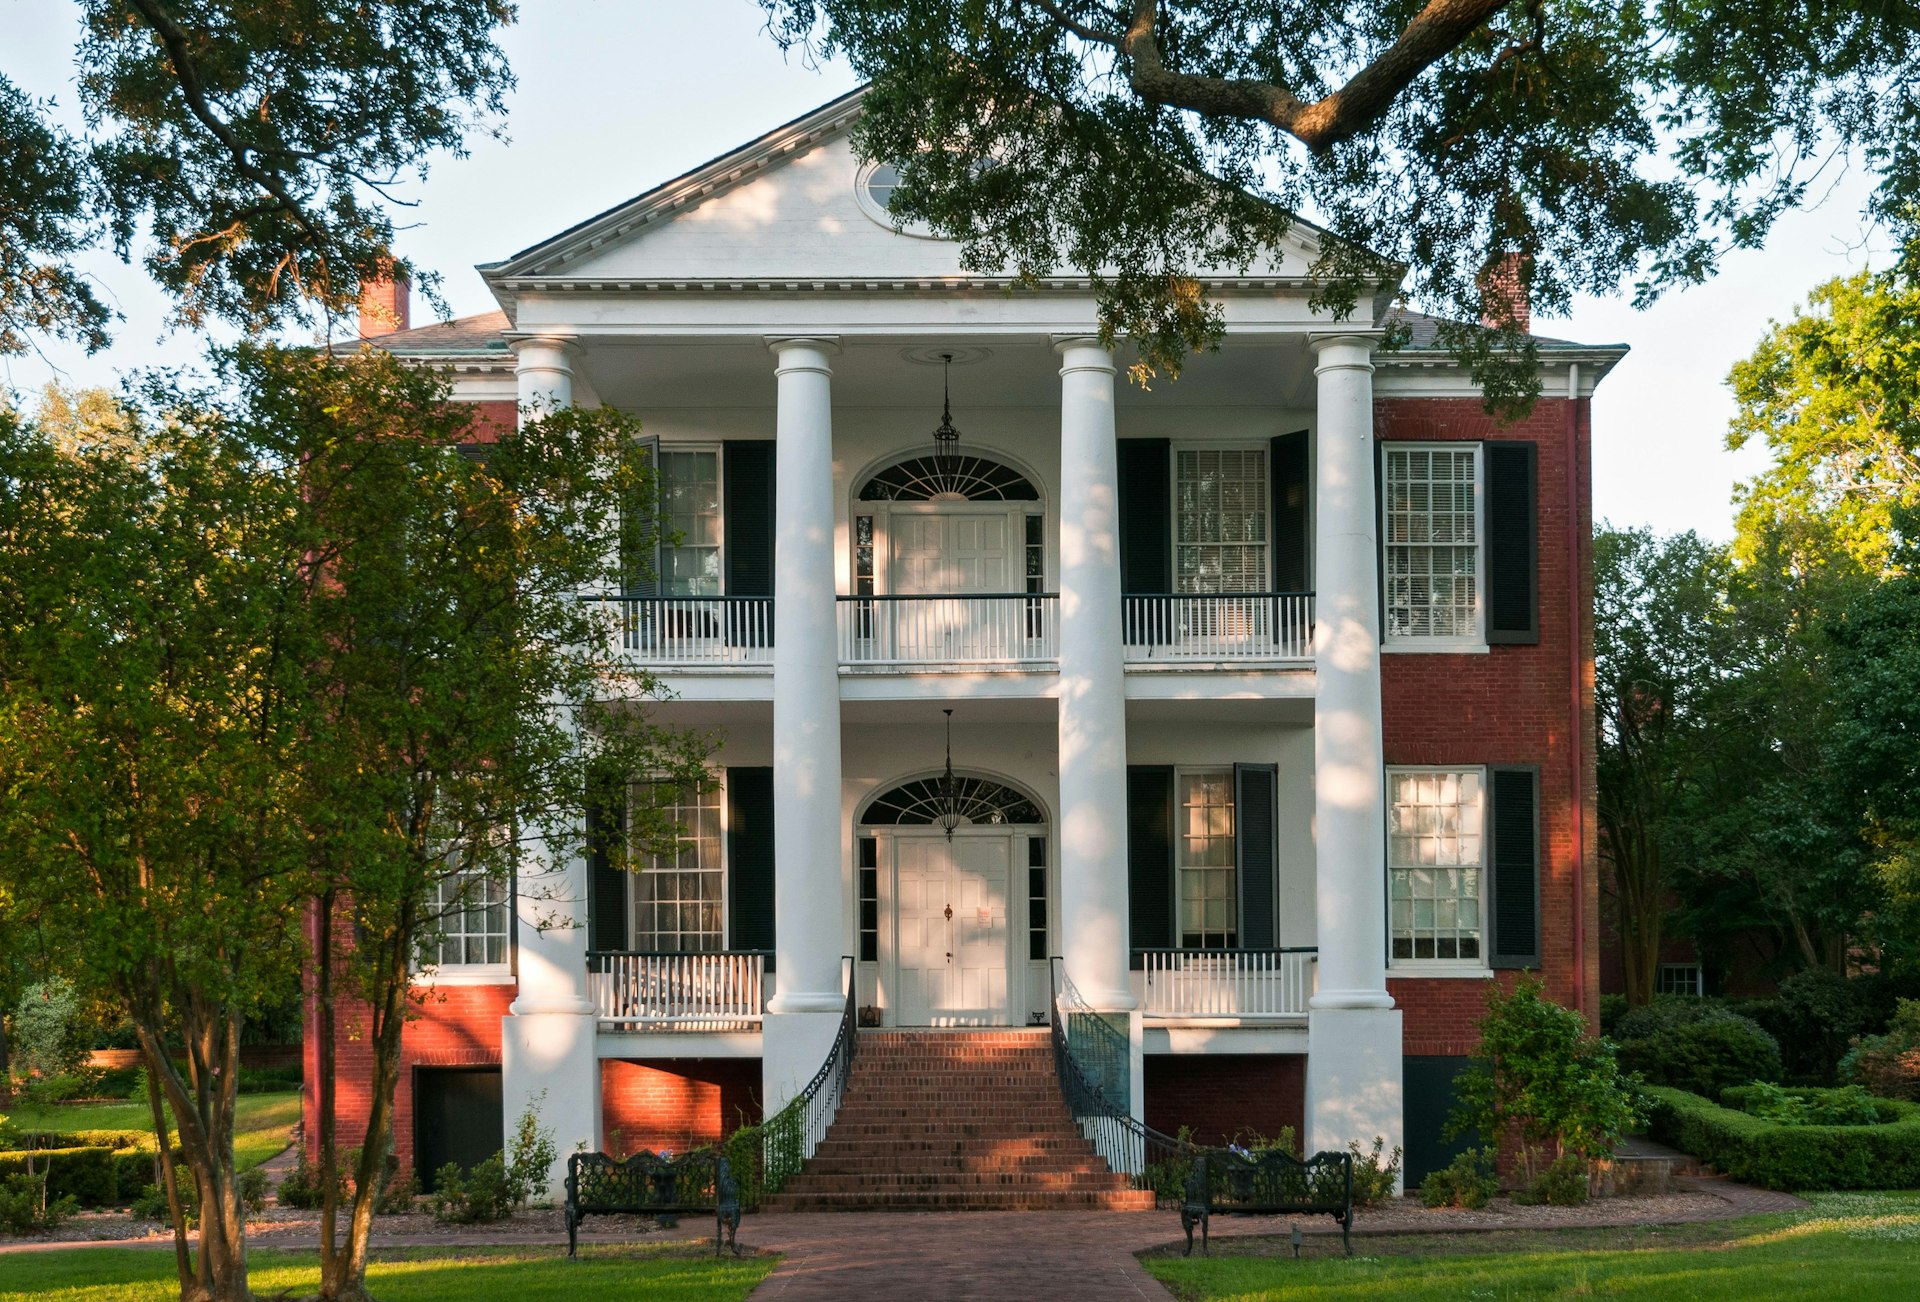 Rosalie Mansion Greek Revival style was influential on antebellum architecture in the region. General Grant also seized this house during the Civil War to use as Union headquarters © Stephen Saks / Getty Images